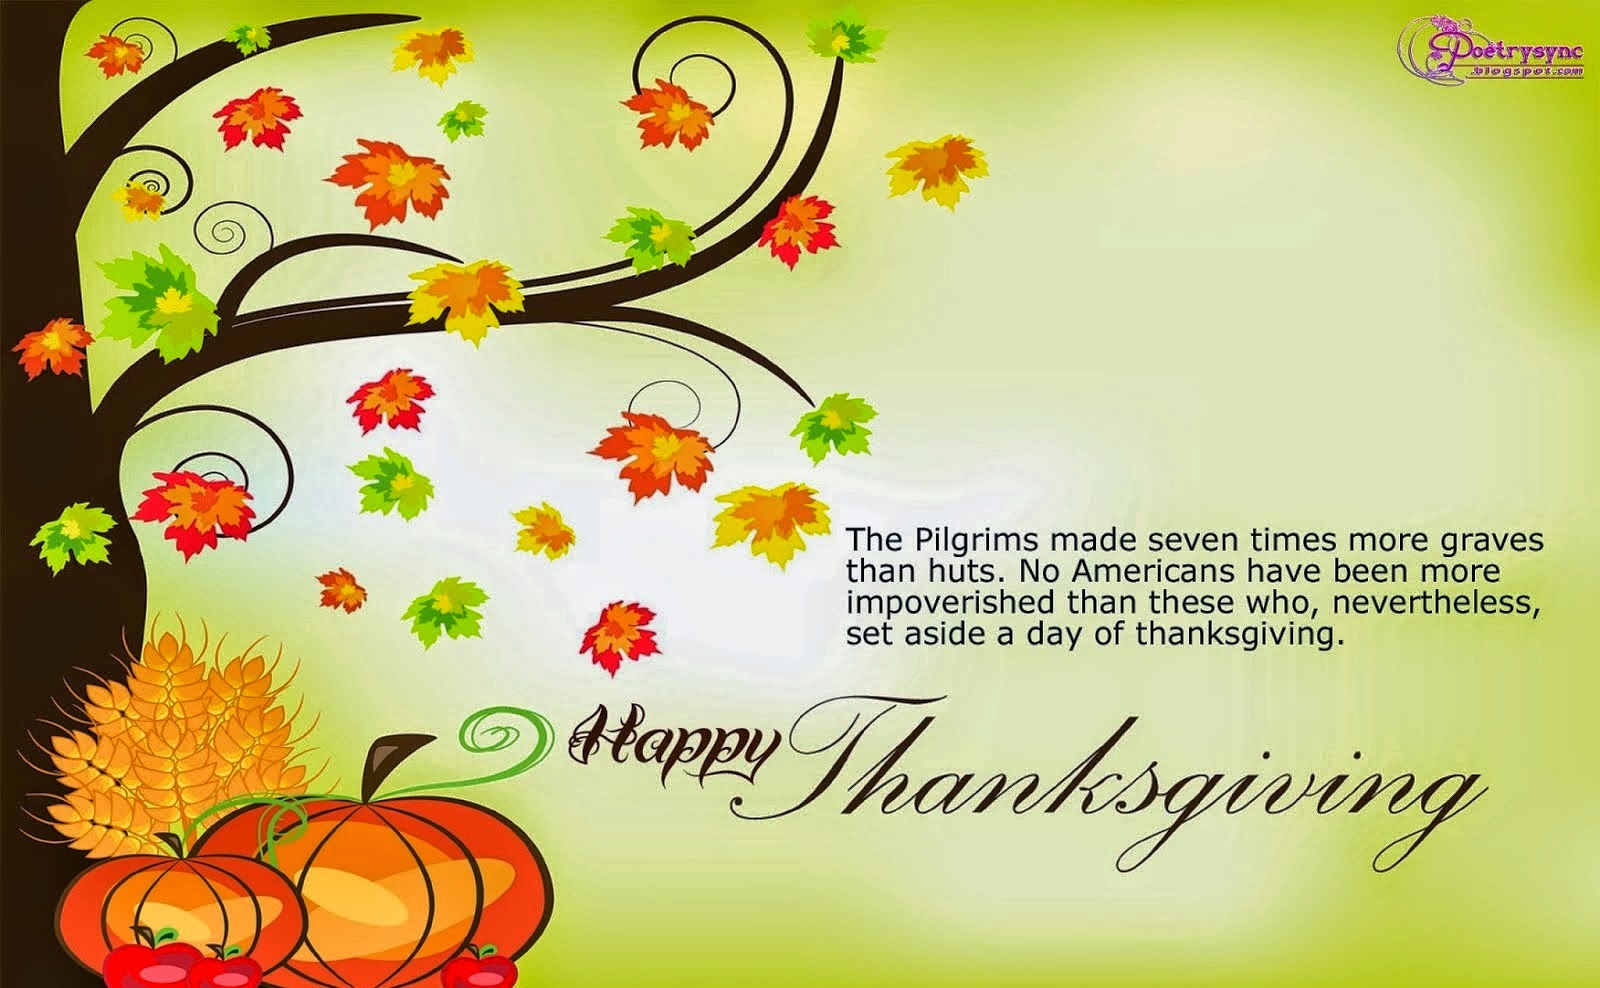 39 Happy Thanksgiving 2016 Quotes Wallpapers Jokes Images Free